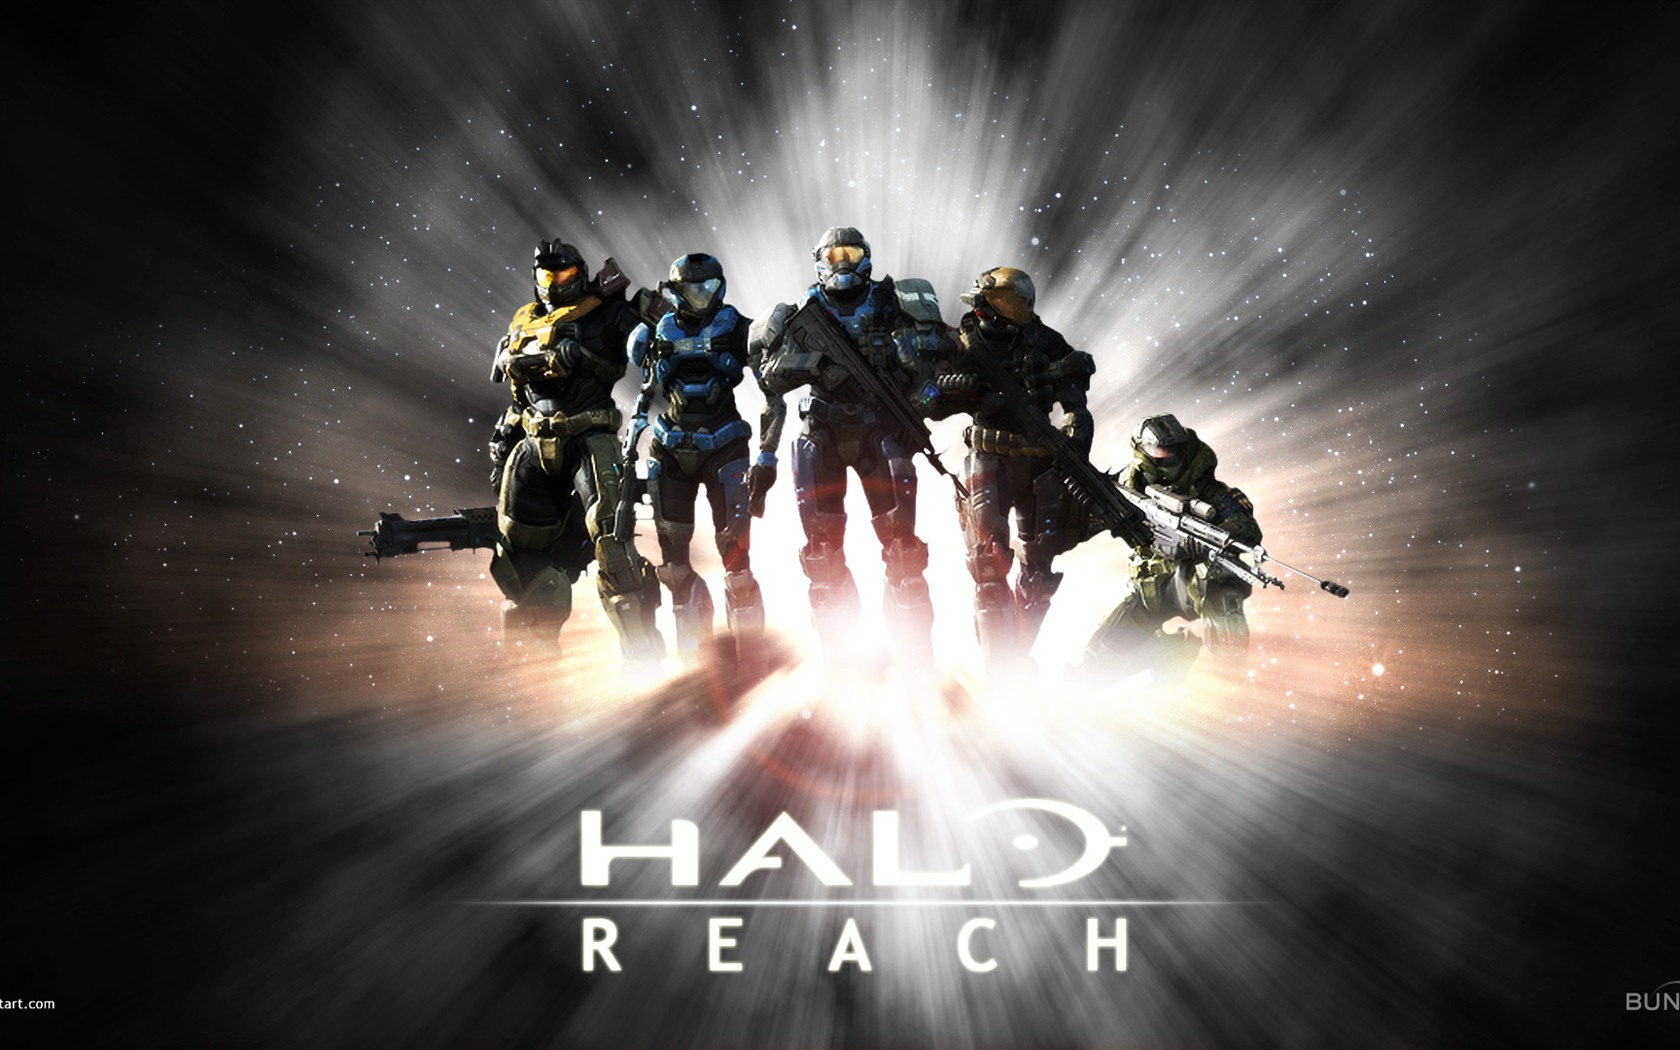 Halo game HD wallpapers #24 - 1680x1050